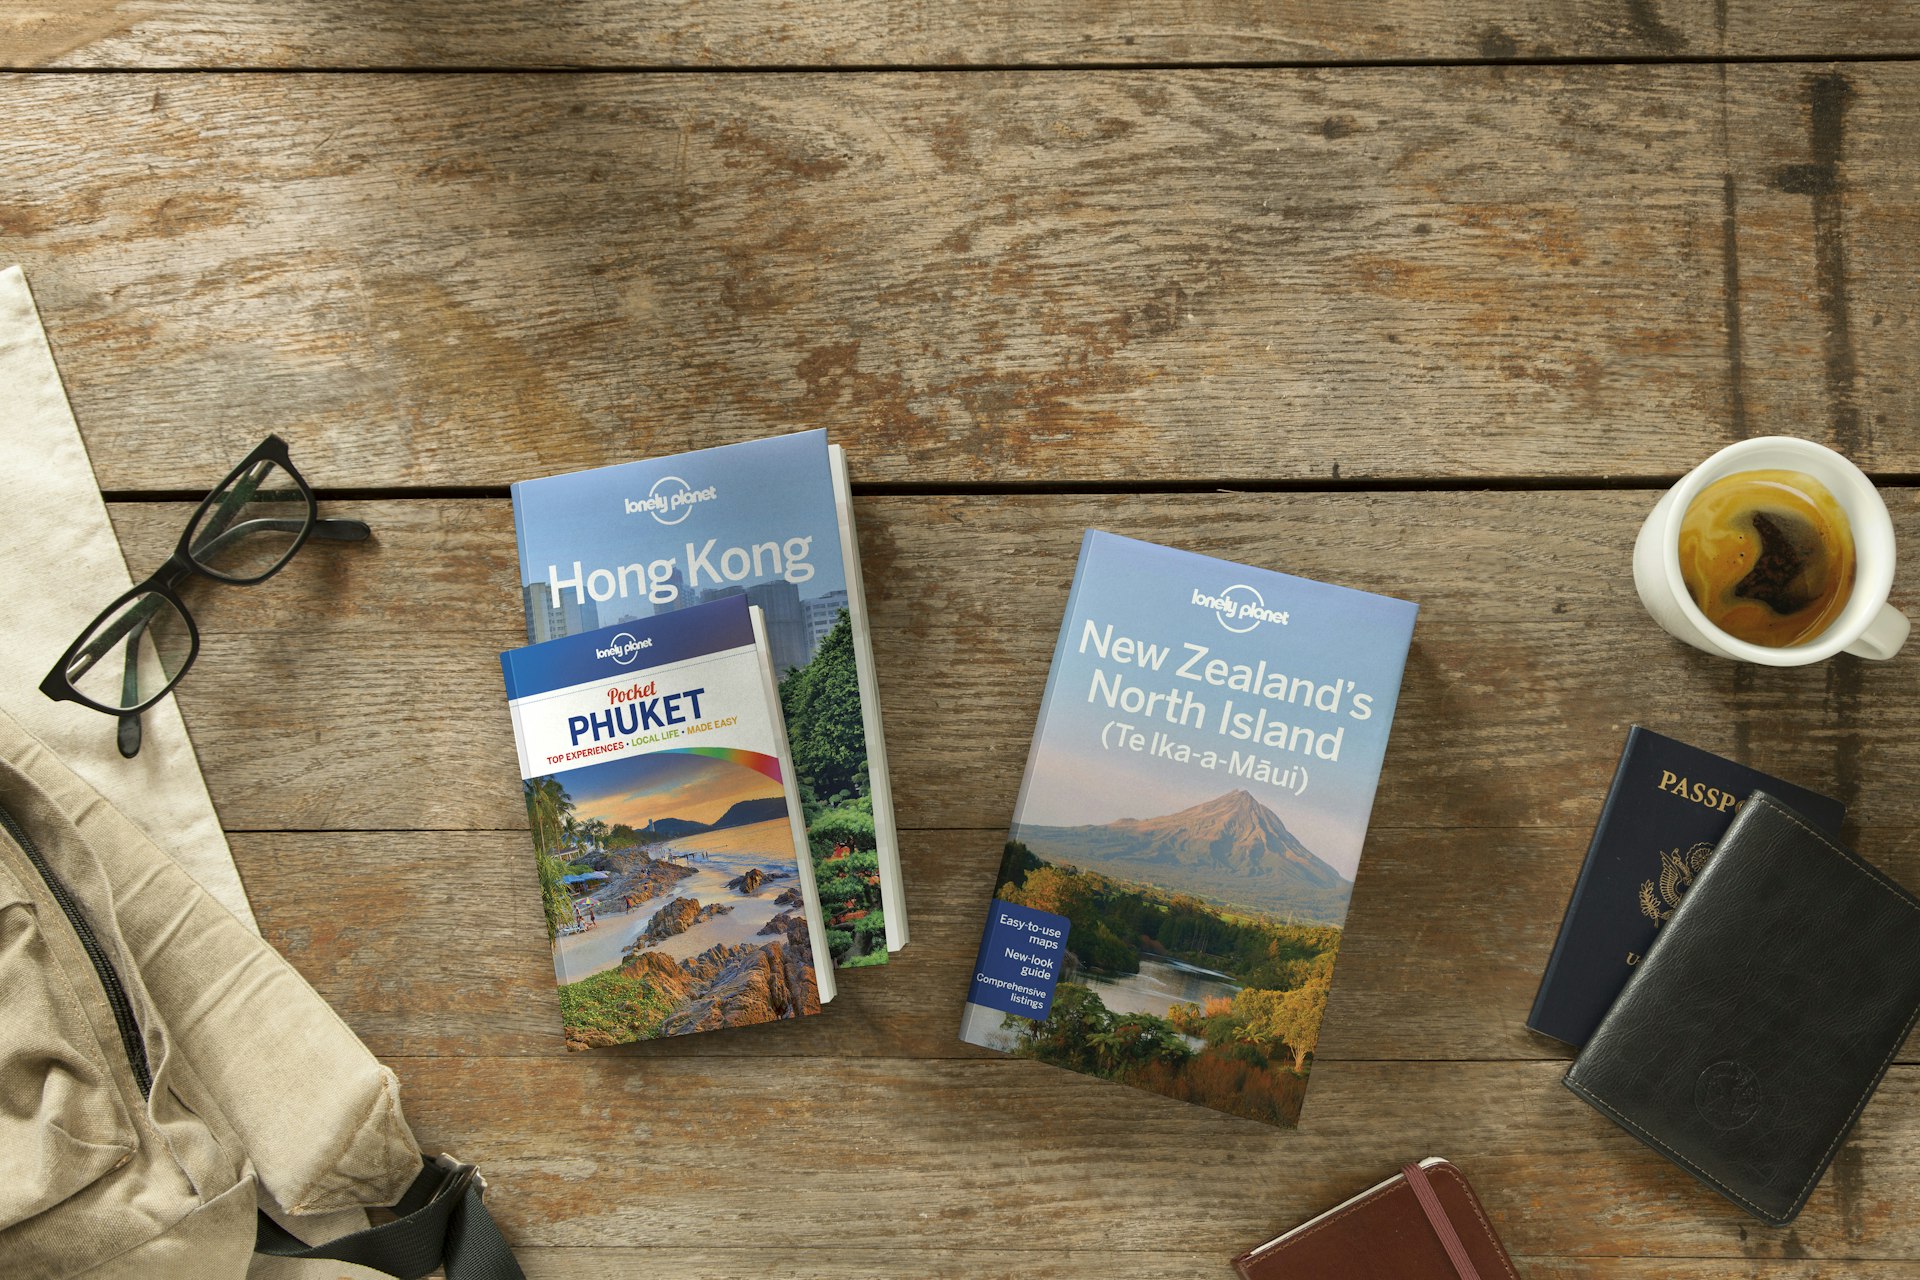 Several Lonely Planet guidebooks sit on a warm, honey-hued wooden table with large planks. One is a guide to Hong Kong, another to Phuket. A pair of black eye glasses sit off to the side. Another is a guide to the north islands of New Zealand, sitting by a blue American passport and a mug of herbal tea.